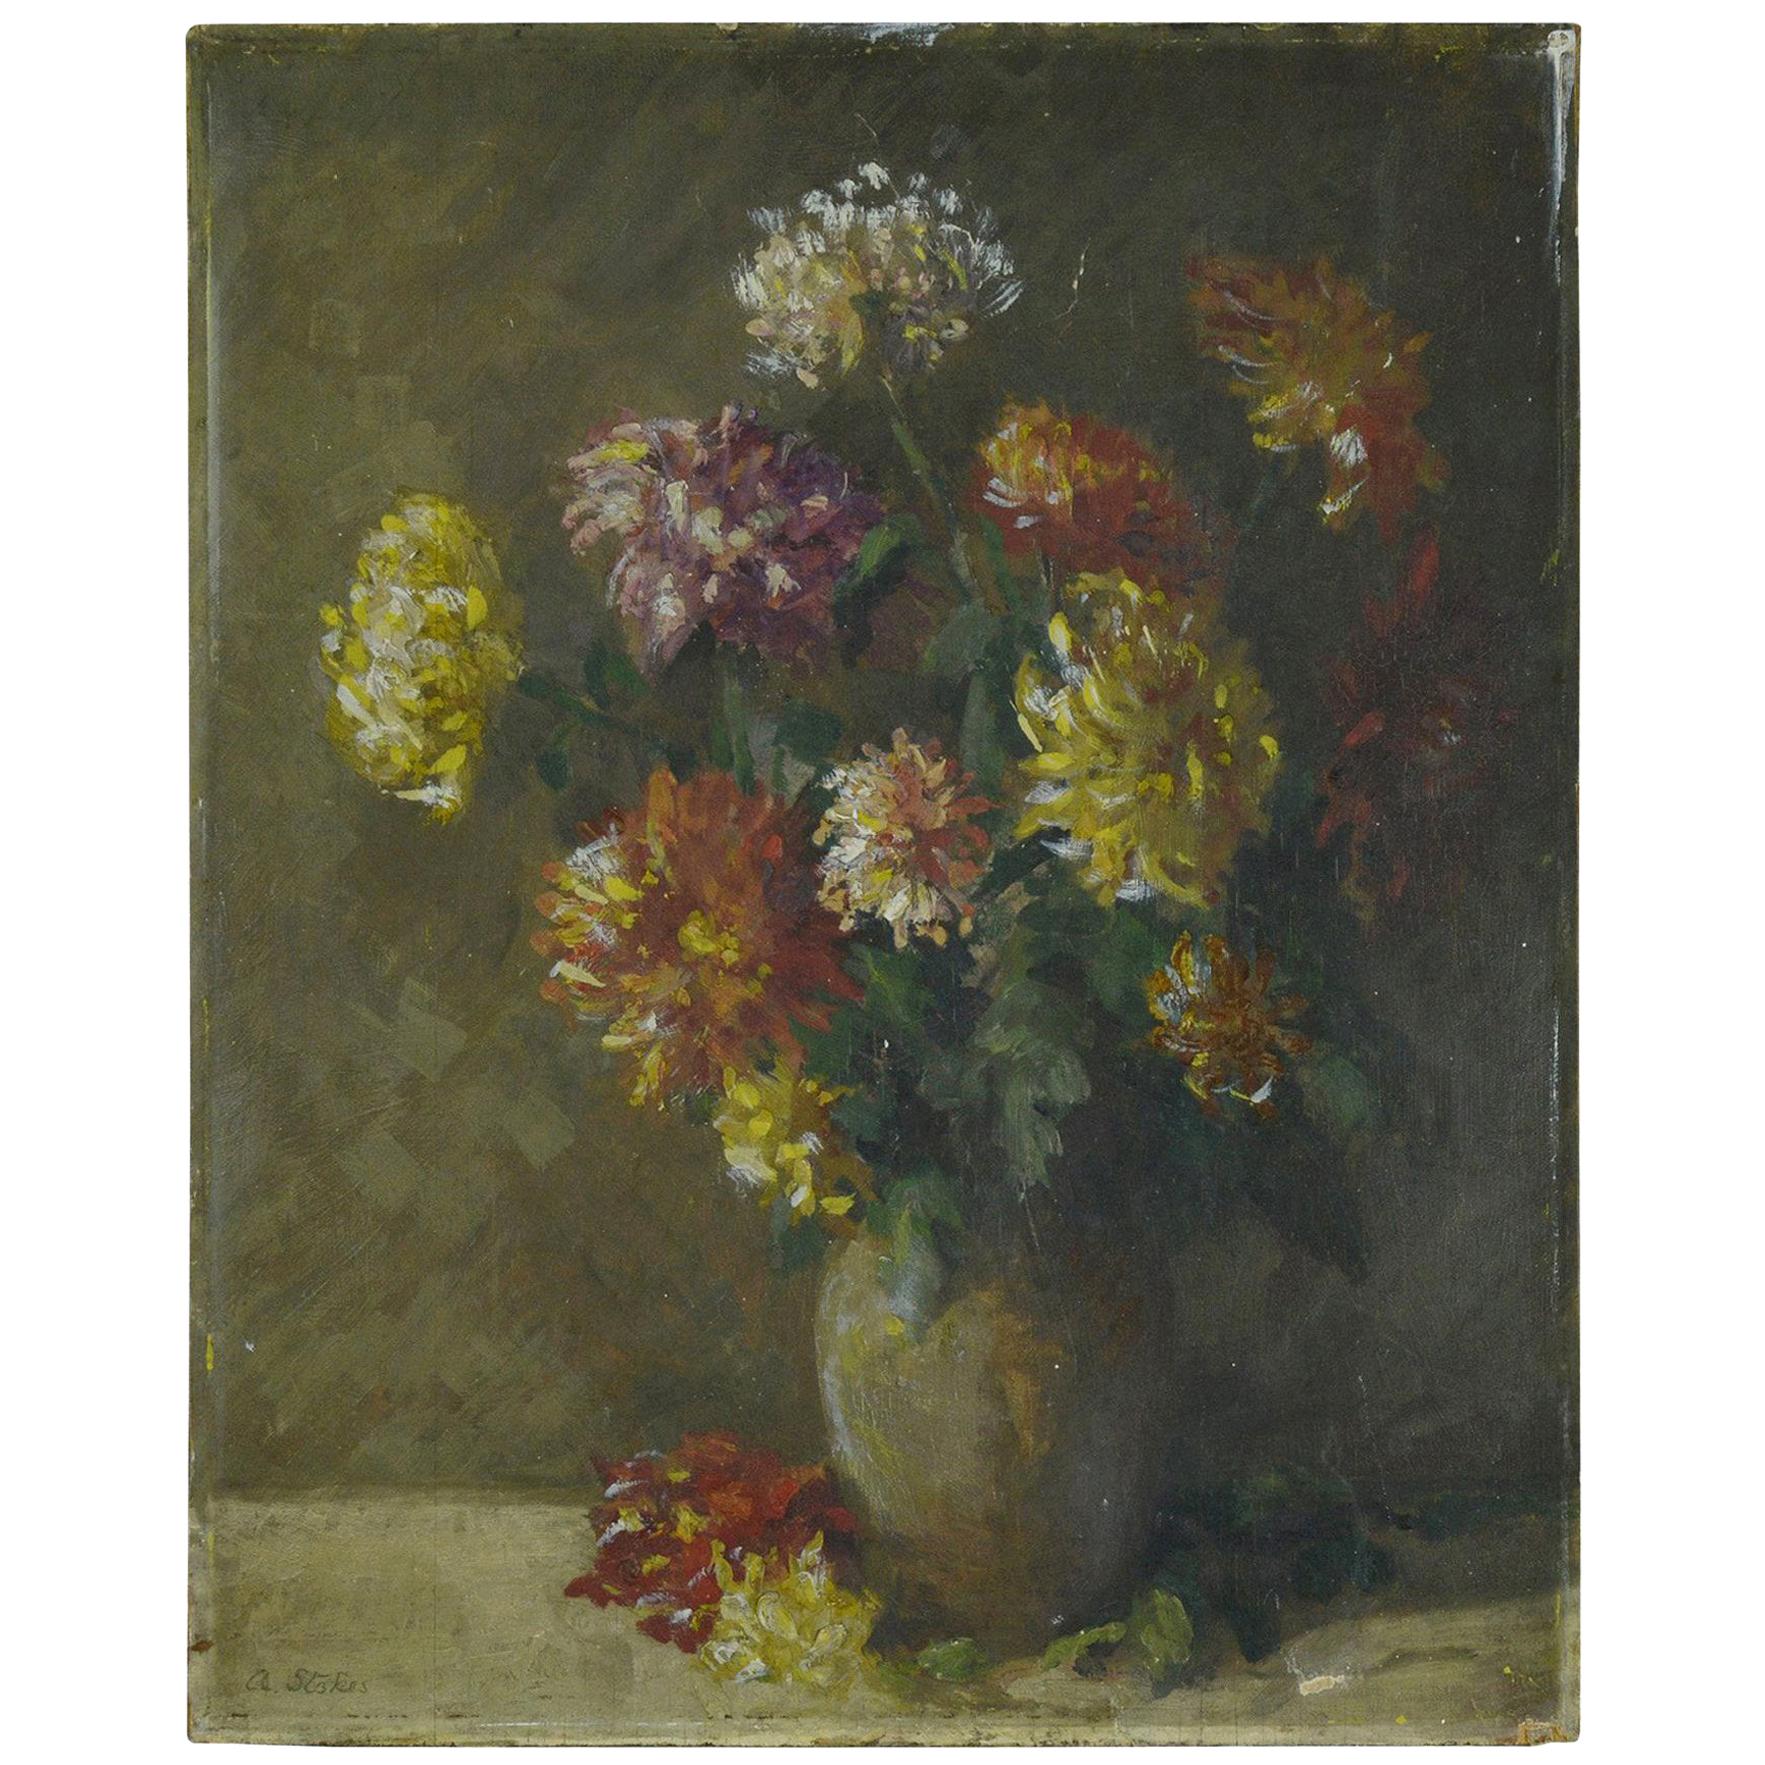 Wonderful painting of chrysanthemums in delightful muted colors.

Oil on board. Unframed. Signed lower left.

Painted in high relief particularly the flowers.

It has been taken out of a frame so the edge is slightly distressed.

Tiny